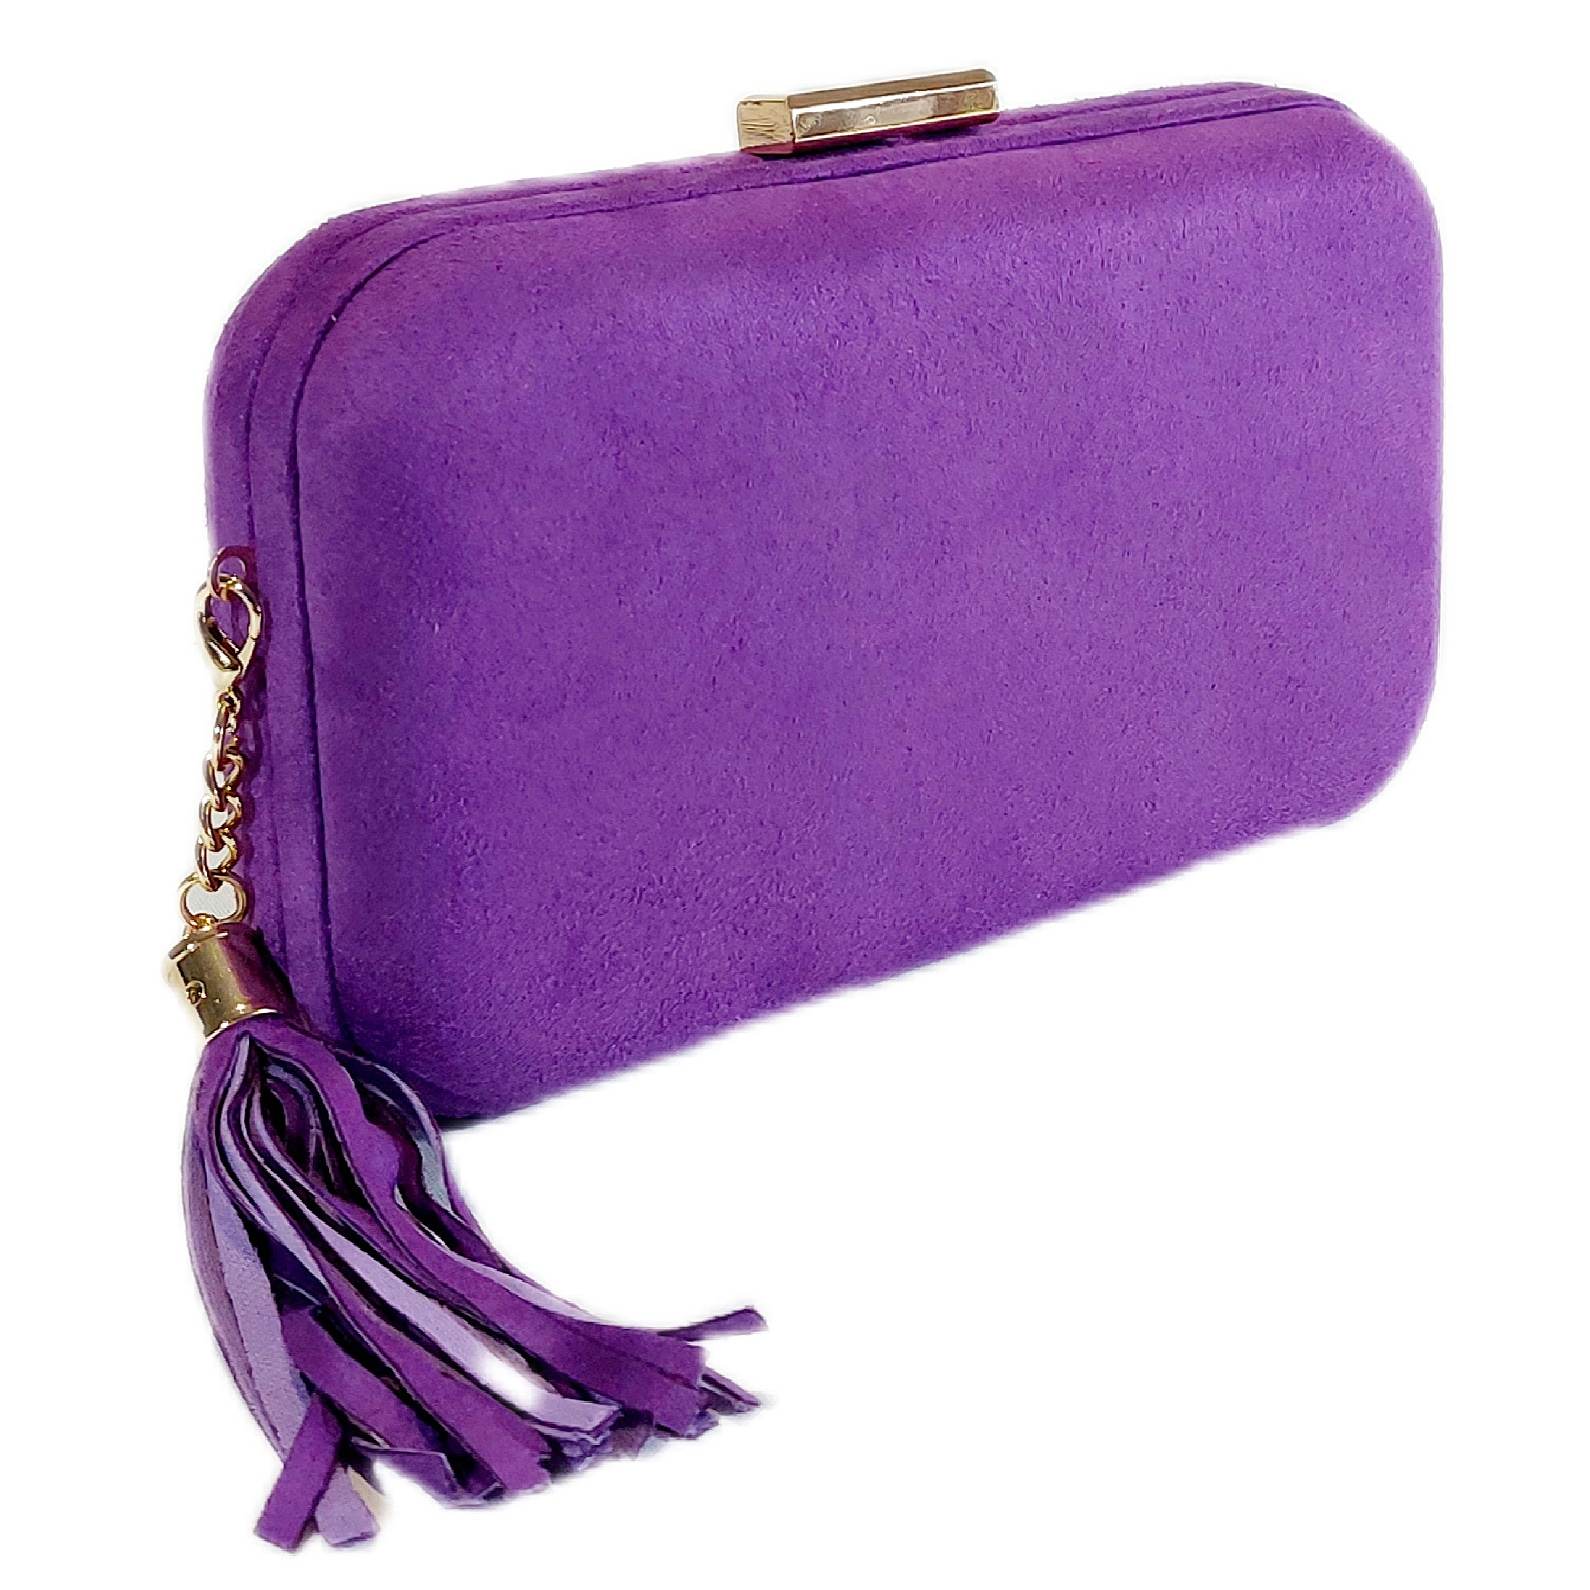 divine velvet clutch in purple from the divalicious candyland collection